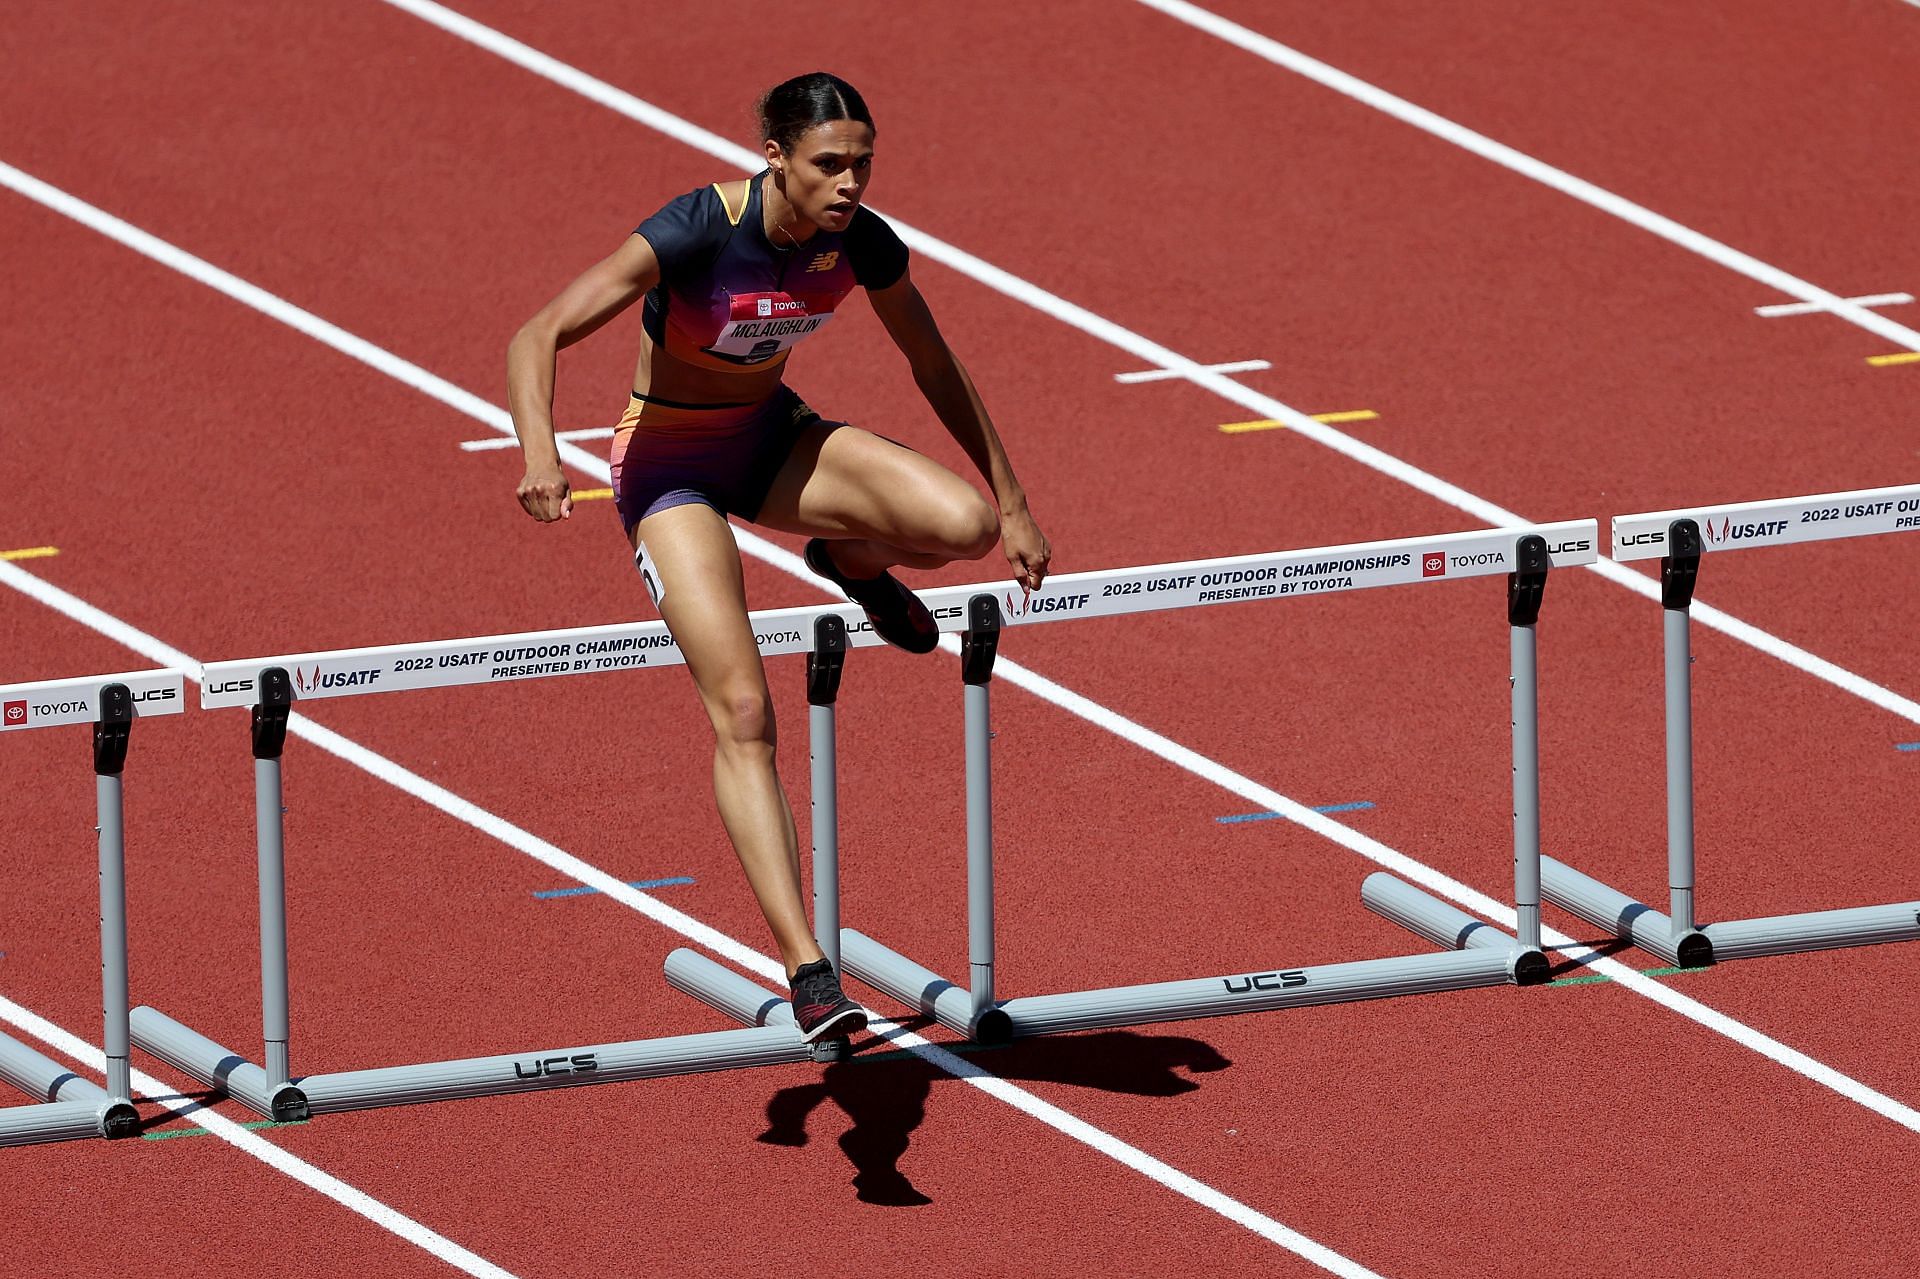 2022 USATF Outdoor Championships Sydney McLaughlin (Image courtesy: Getty)